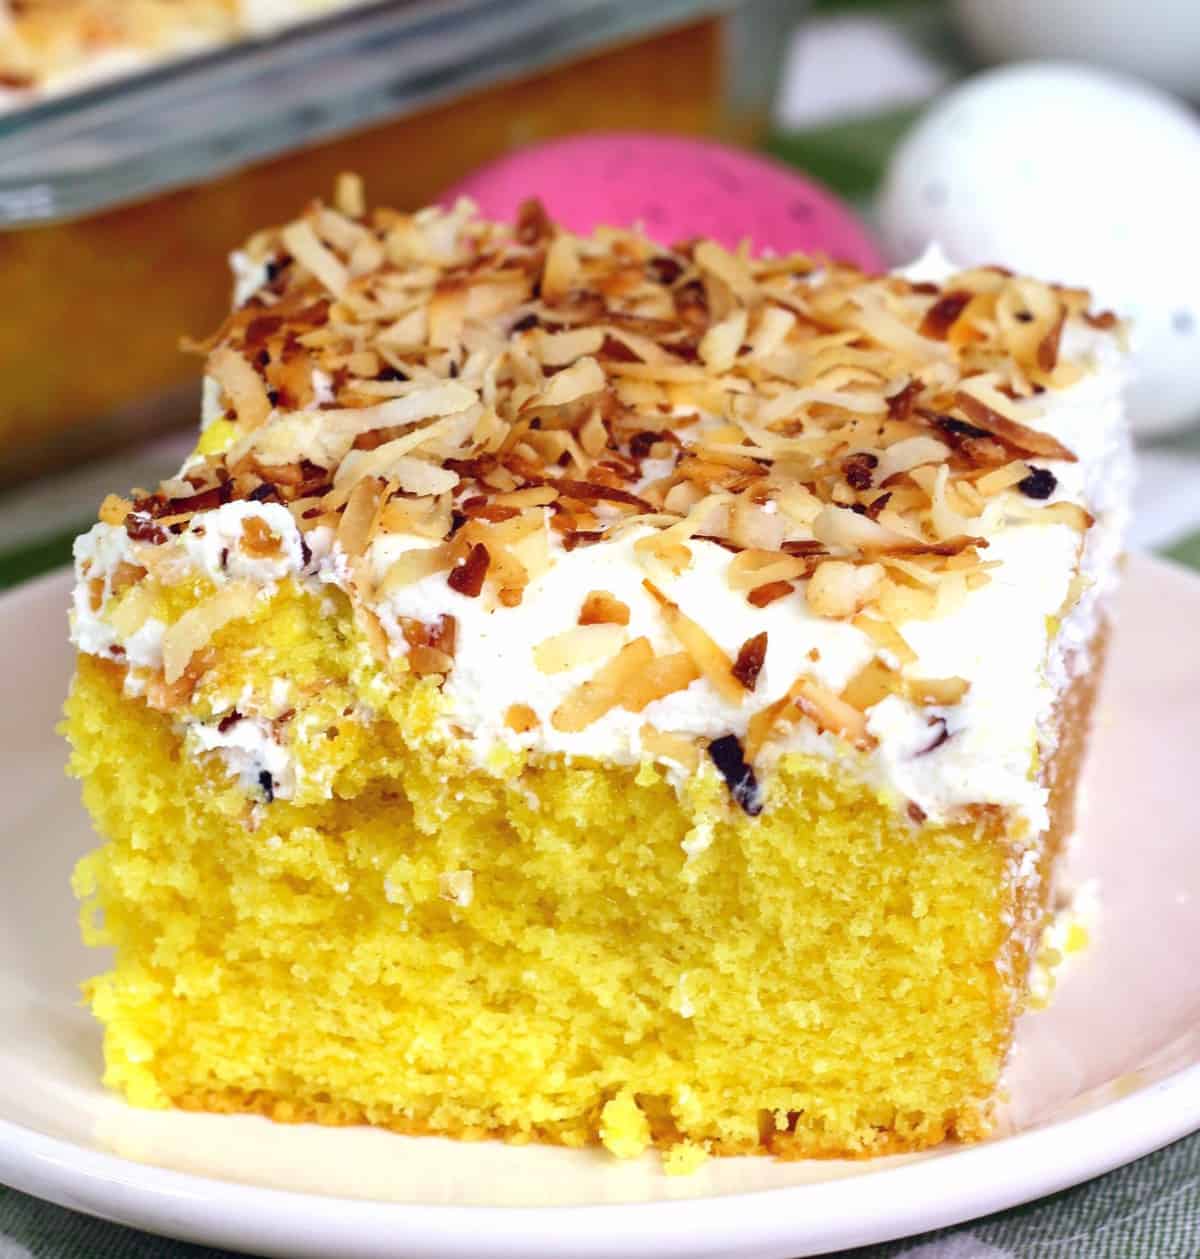 Soft & Fluffy Eggless Coconut Cake - Mommy's Home Cooking